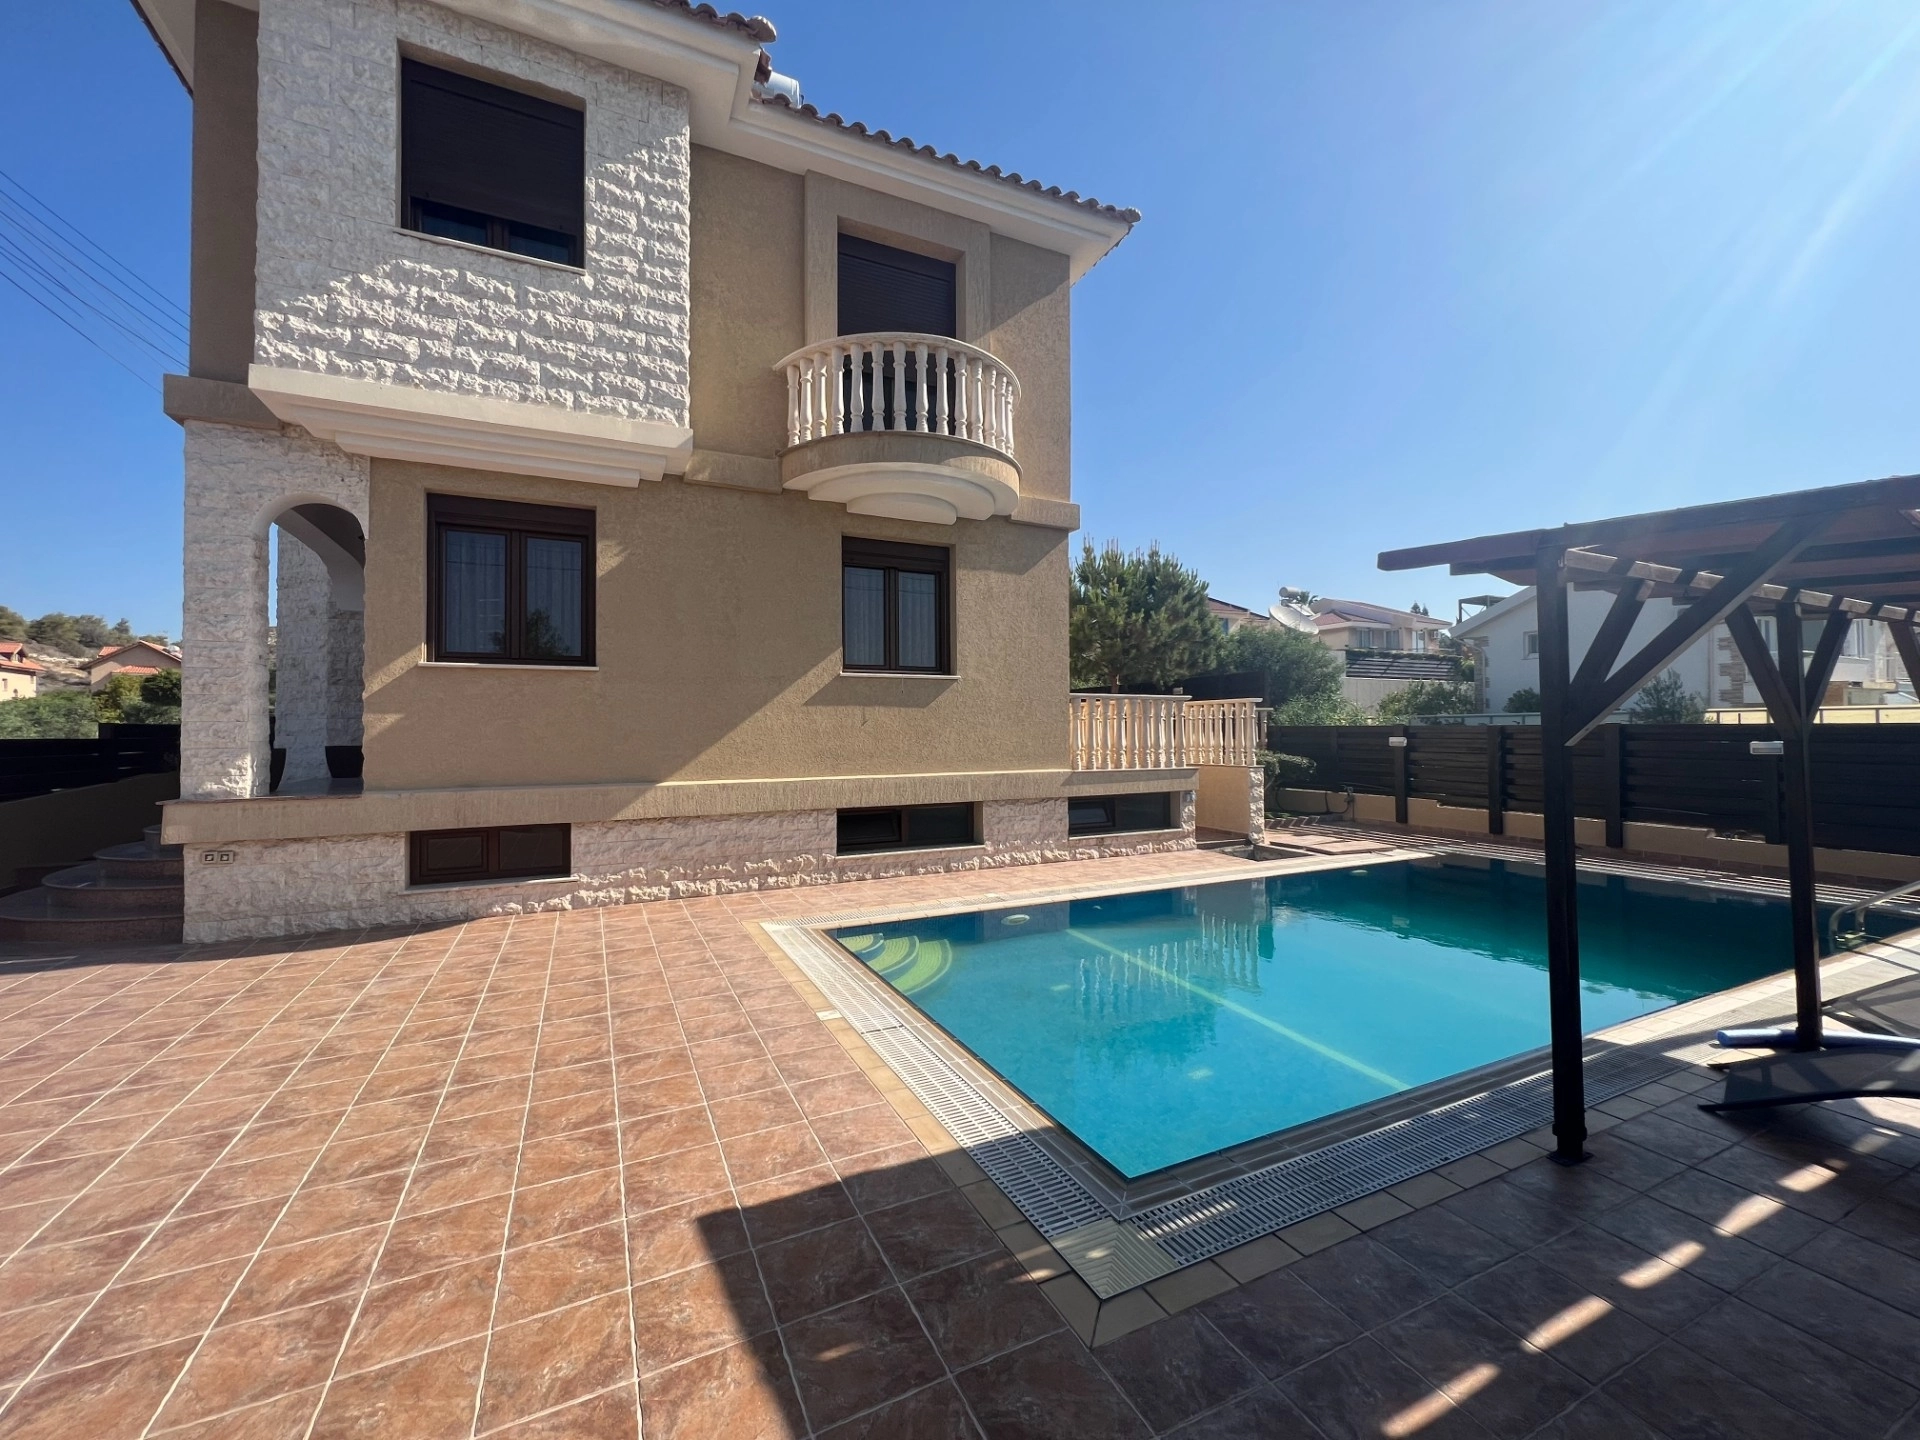 5 Bedroom House for Sale in Parekklisia, Limassol District